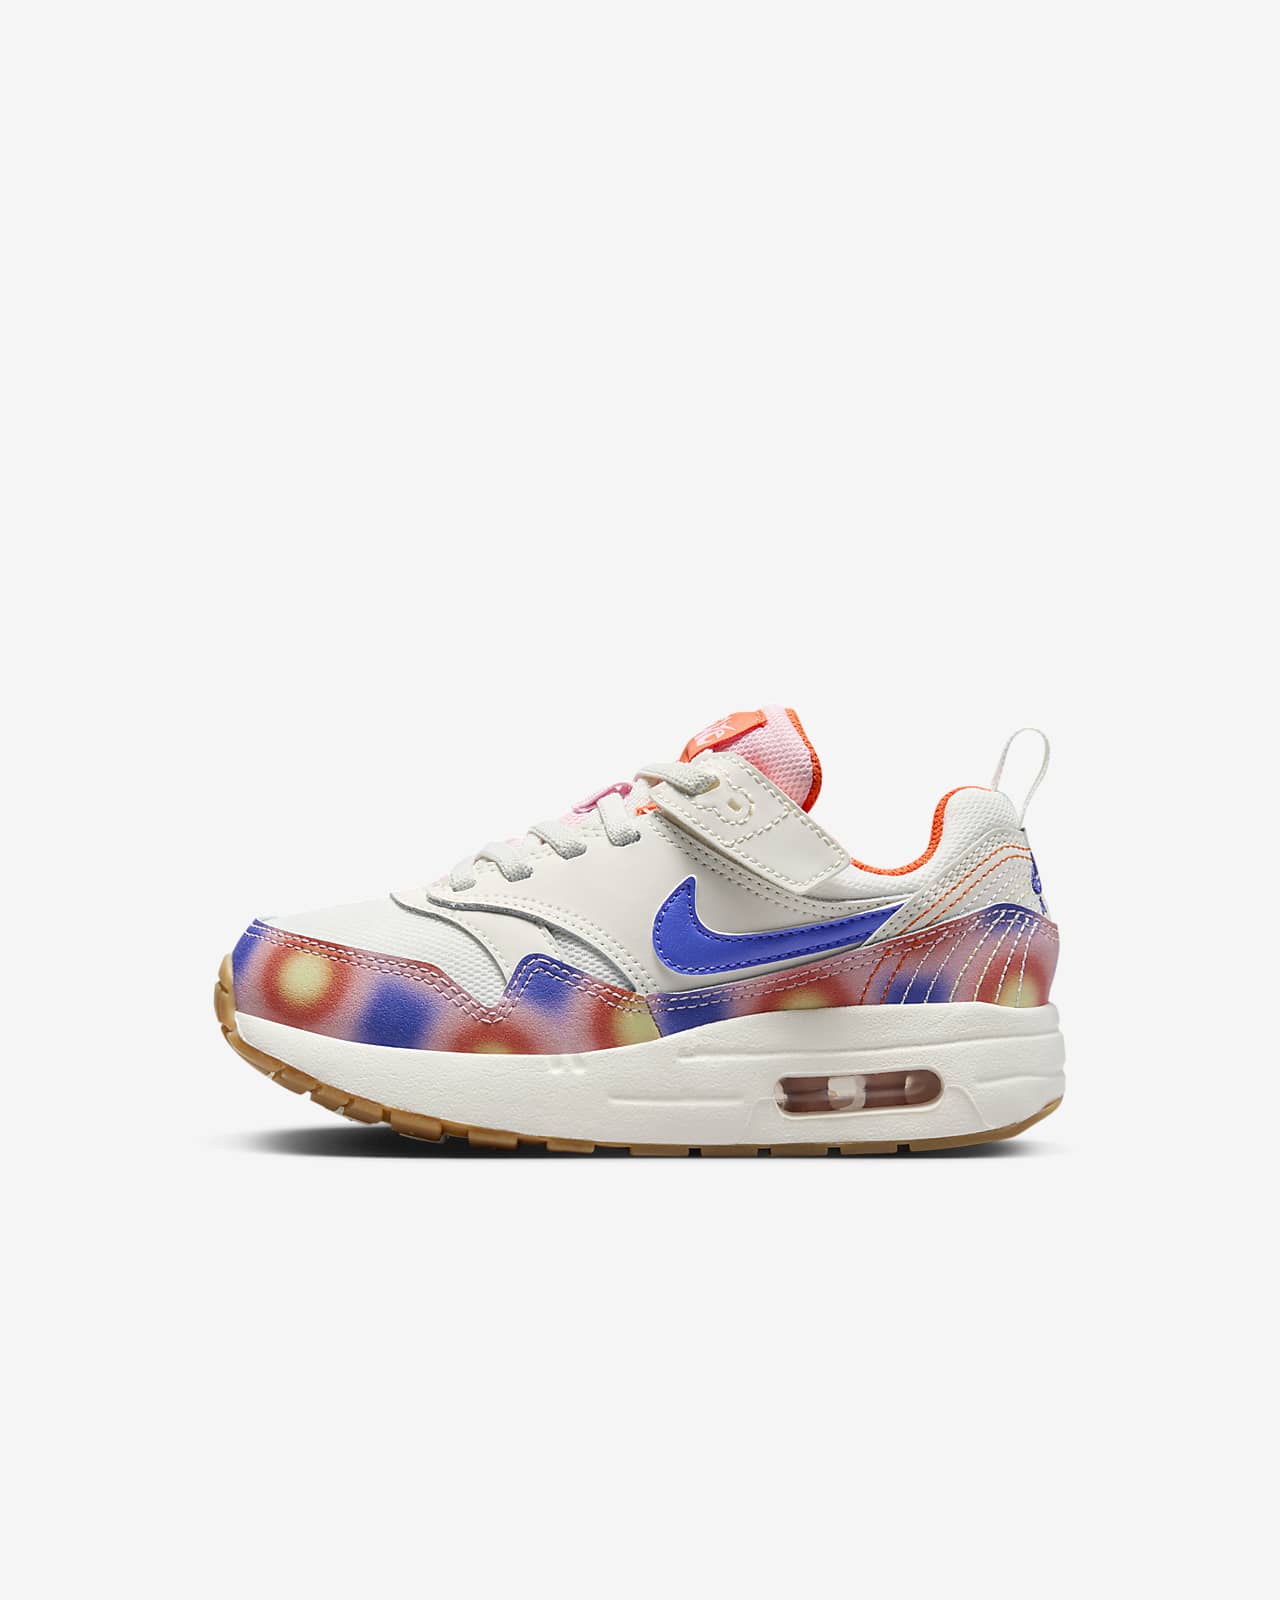 Custom Nike Air Max 90 from Sunrise 2 Sunset Unique and 